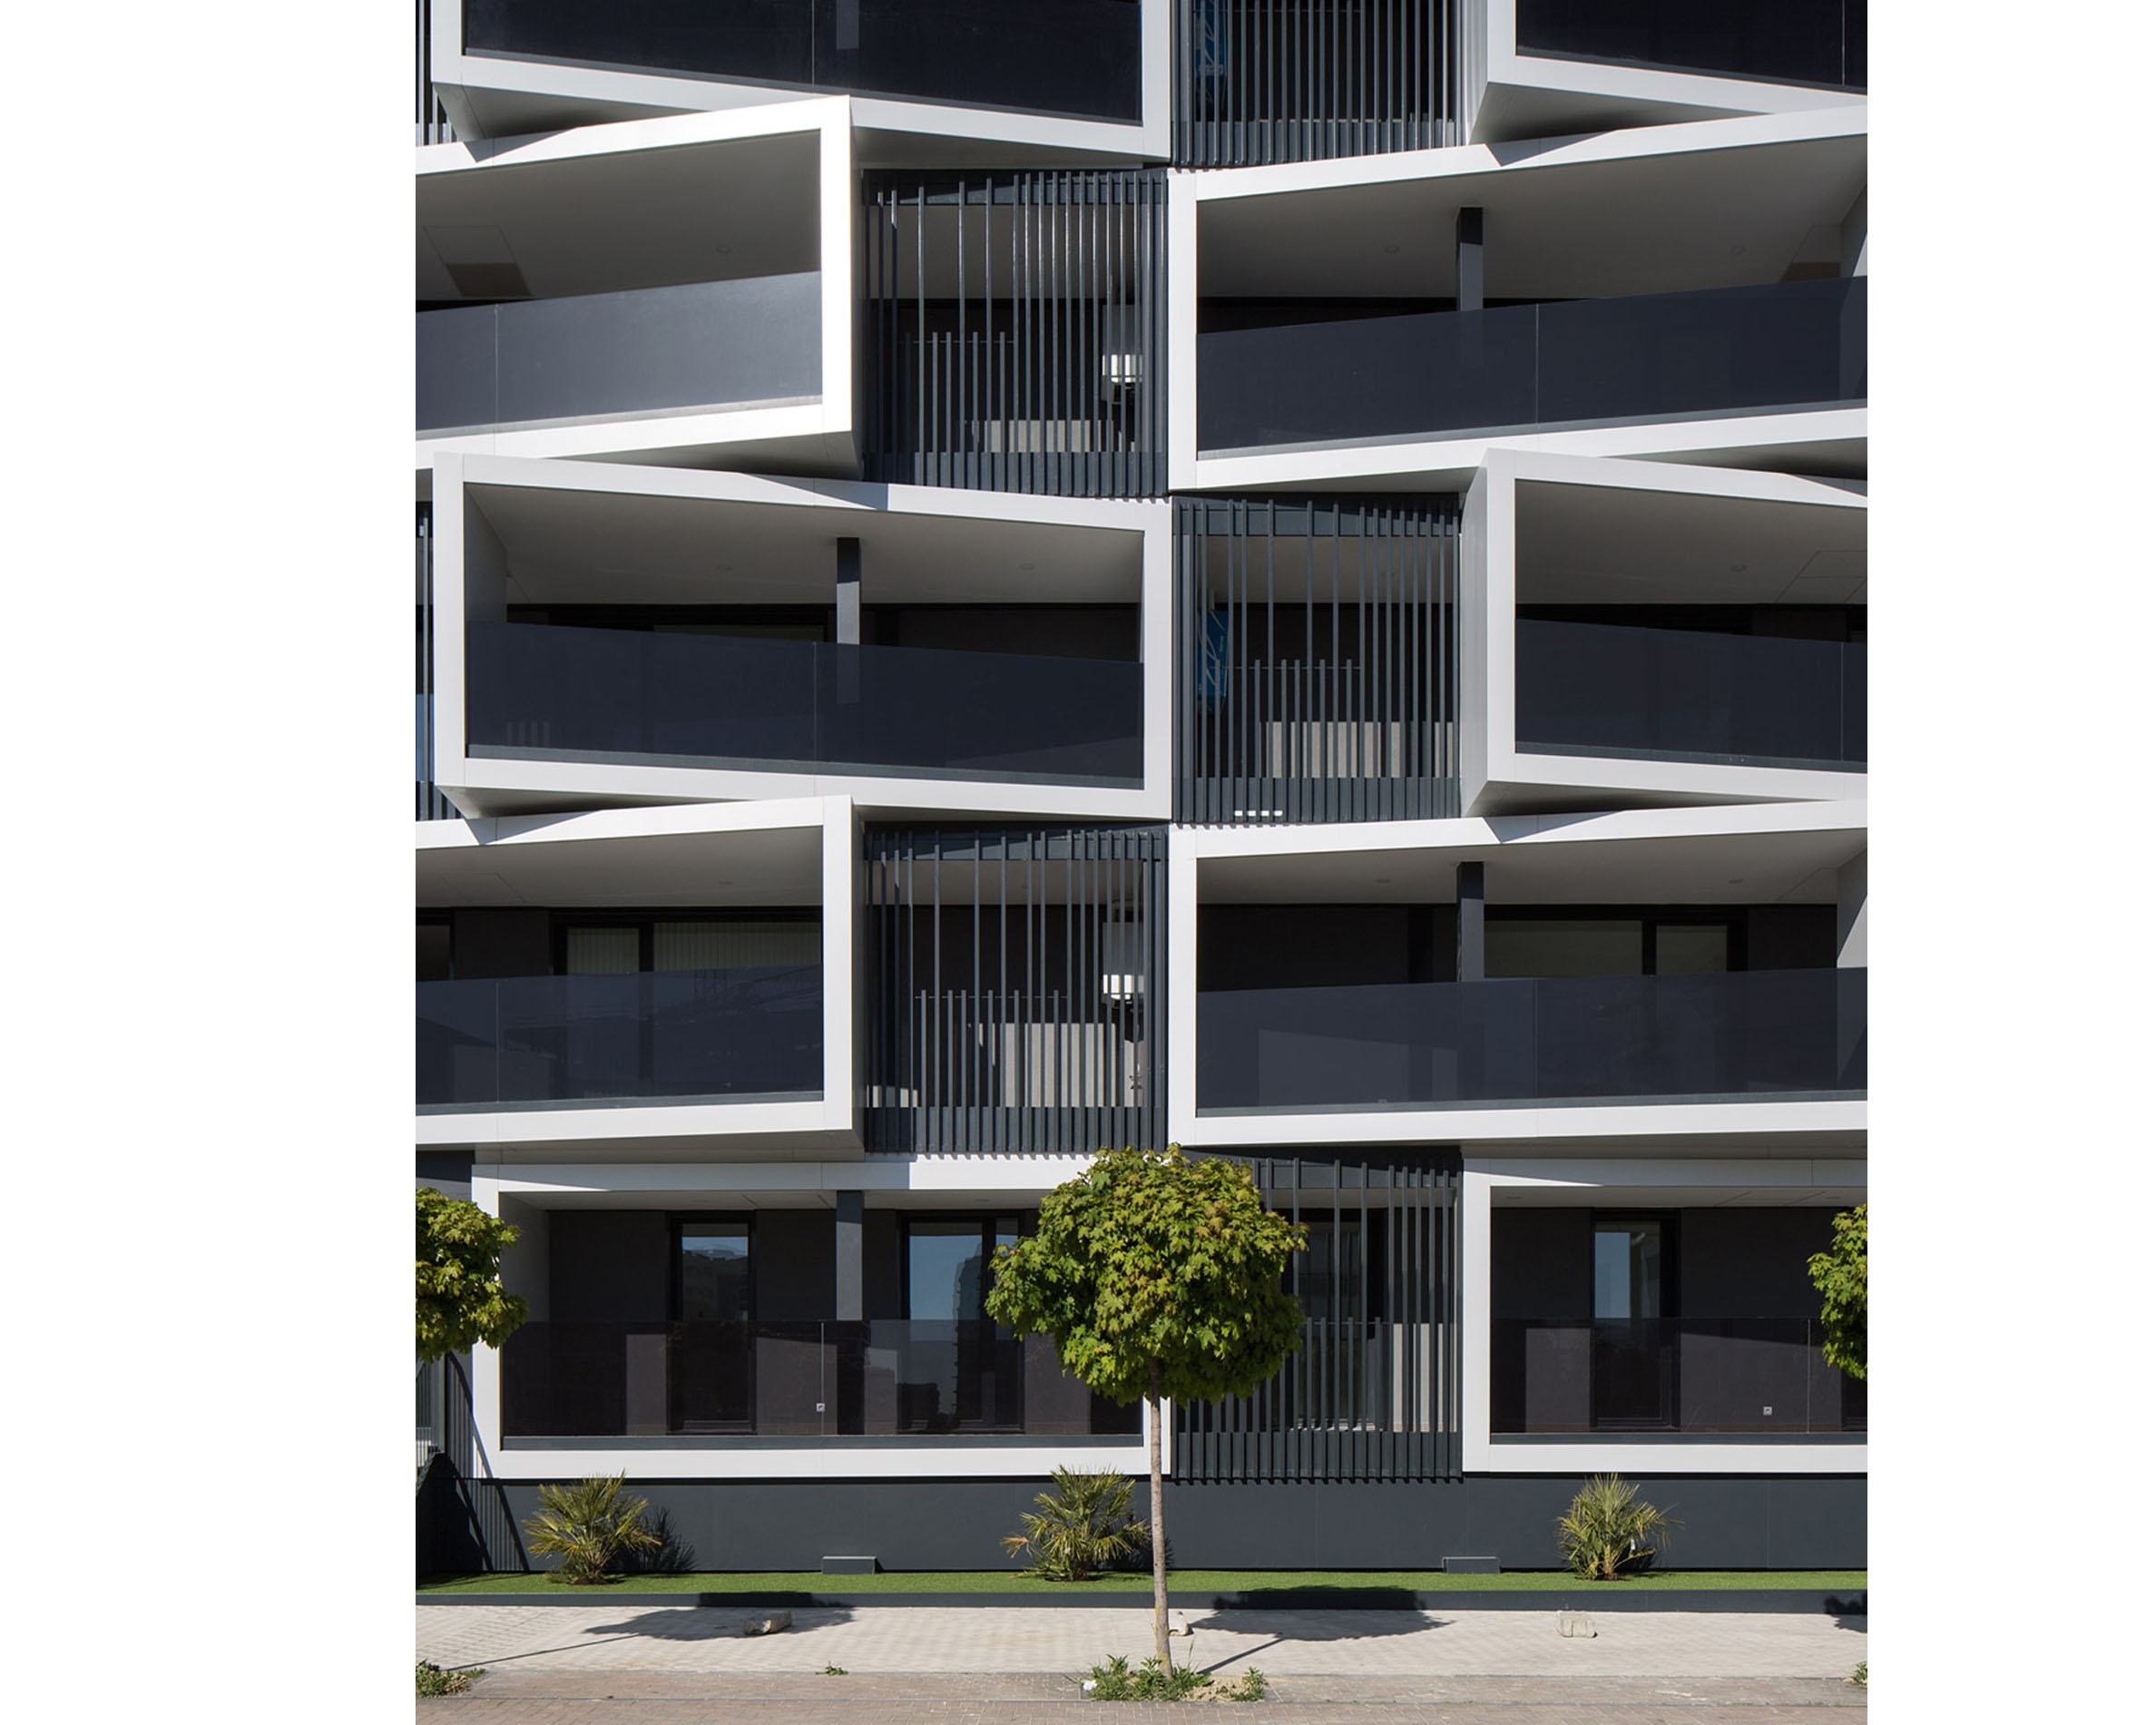 The Thermos residential building is the firts passivhaus certificate building in Spain - STACBOND aluminium composite panel